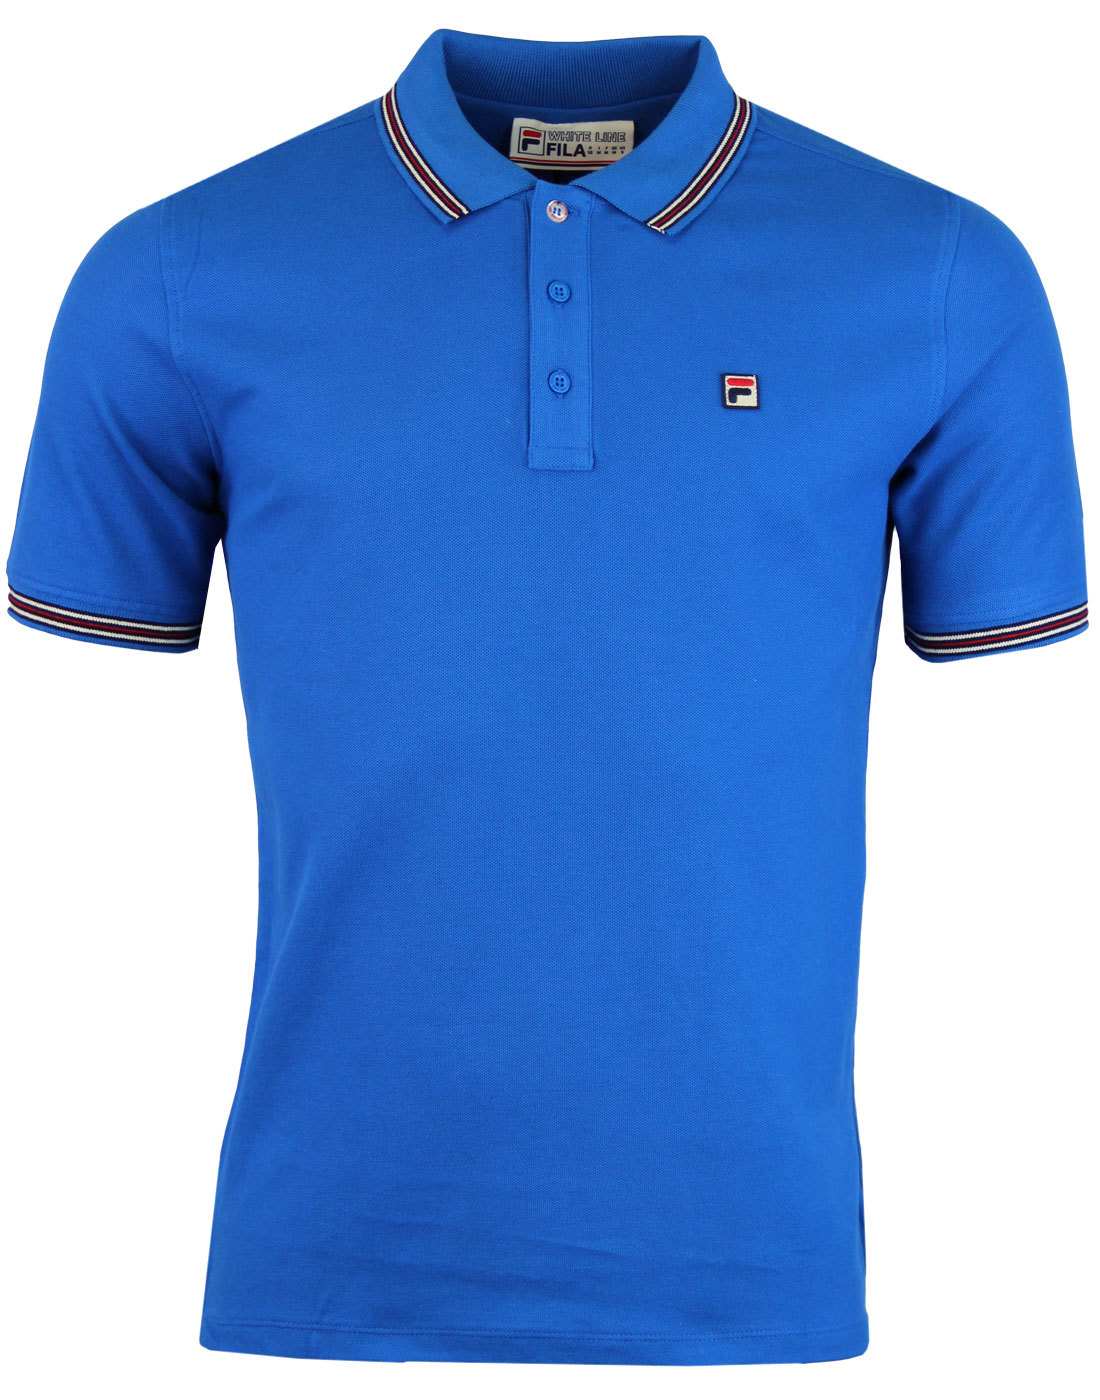 FILA VINTAGE Matcho 4 Retro 80s Casuals Tipped Polo Imperial Blue